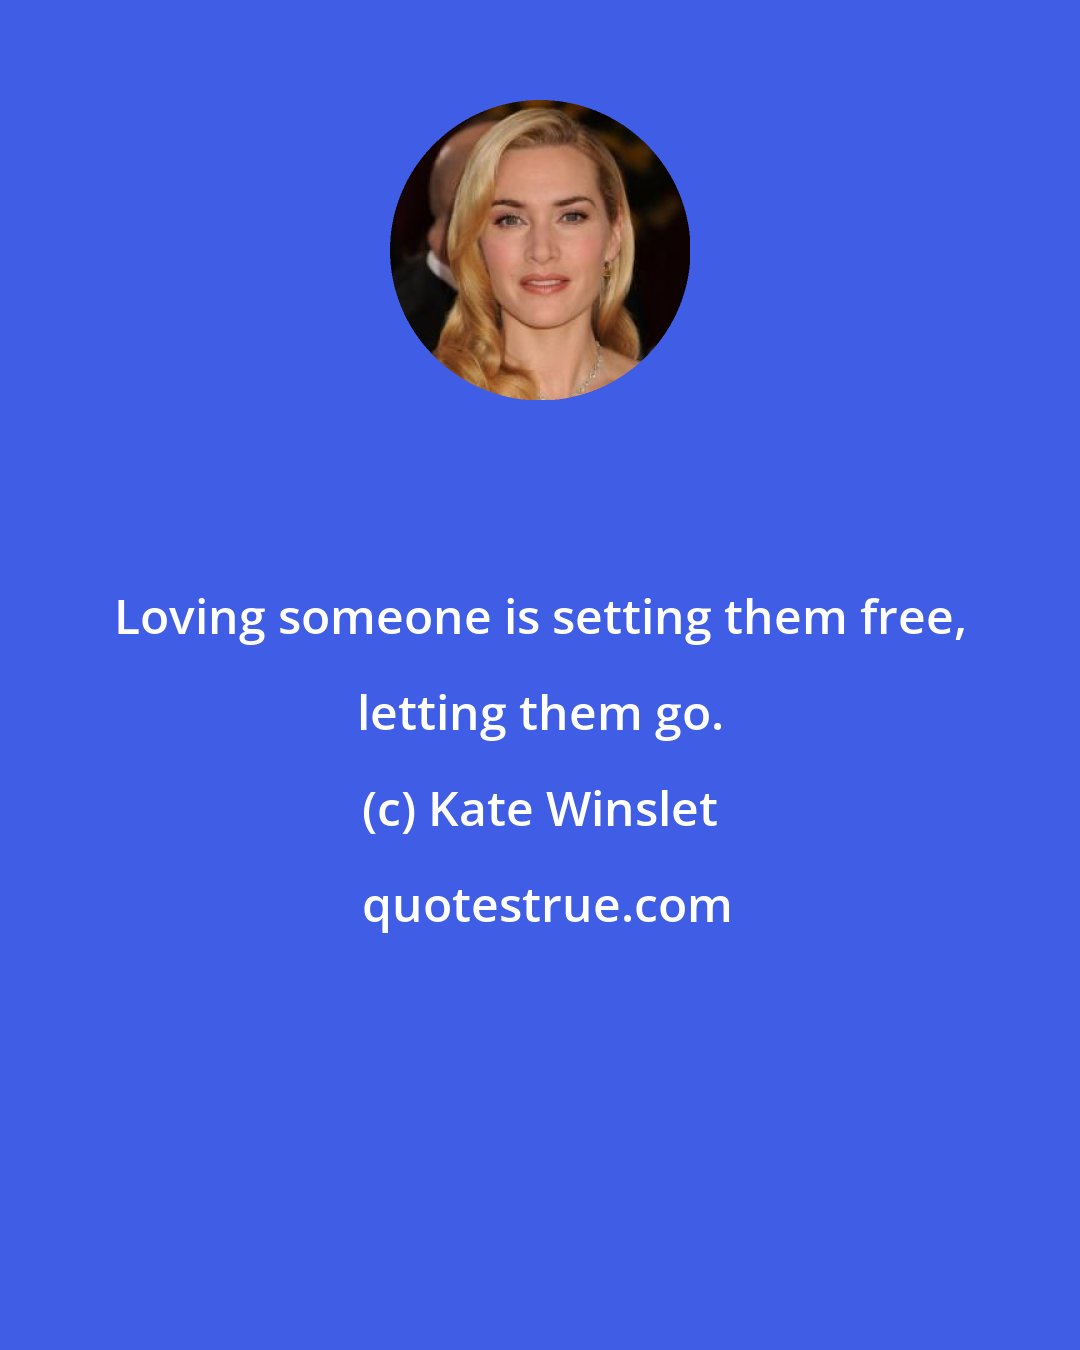 Kate Winslet: Loving someone is setting them free, letting them go.